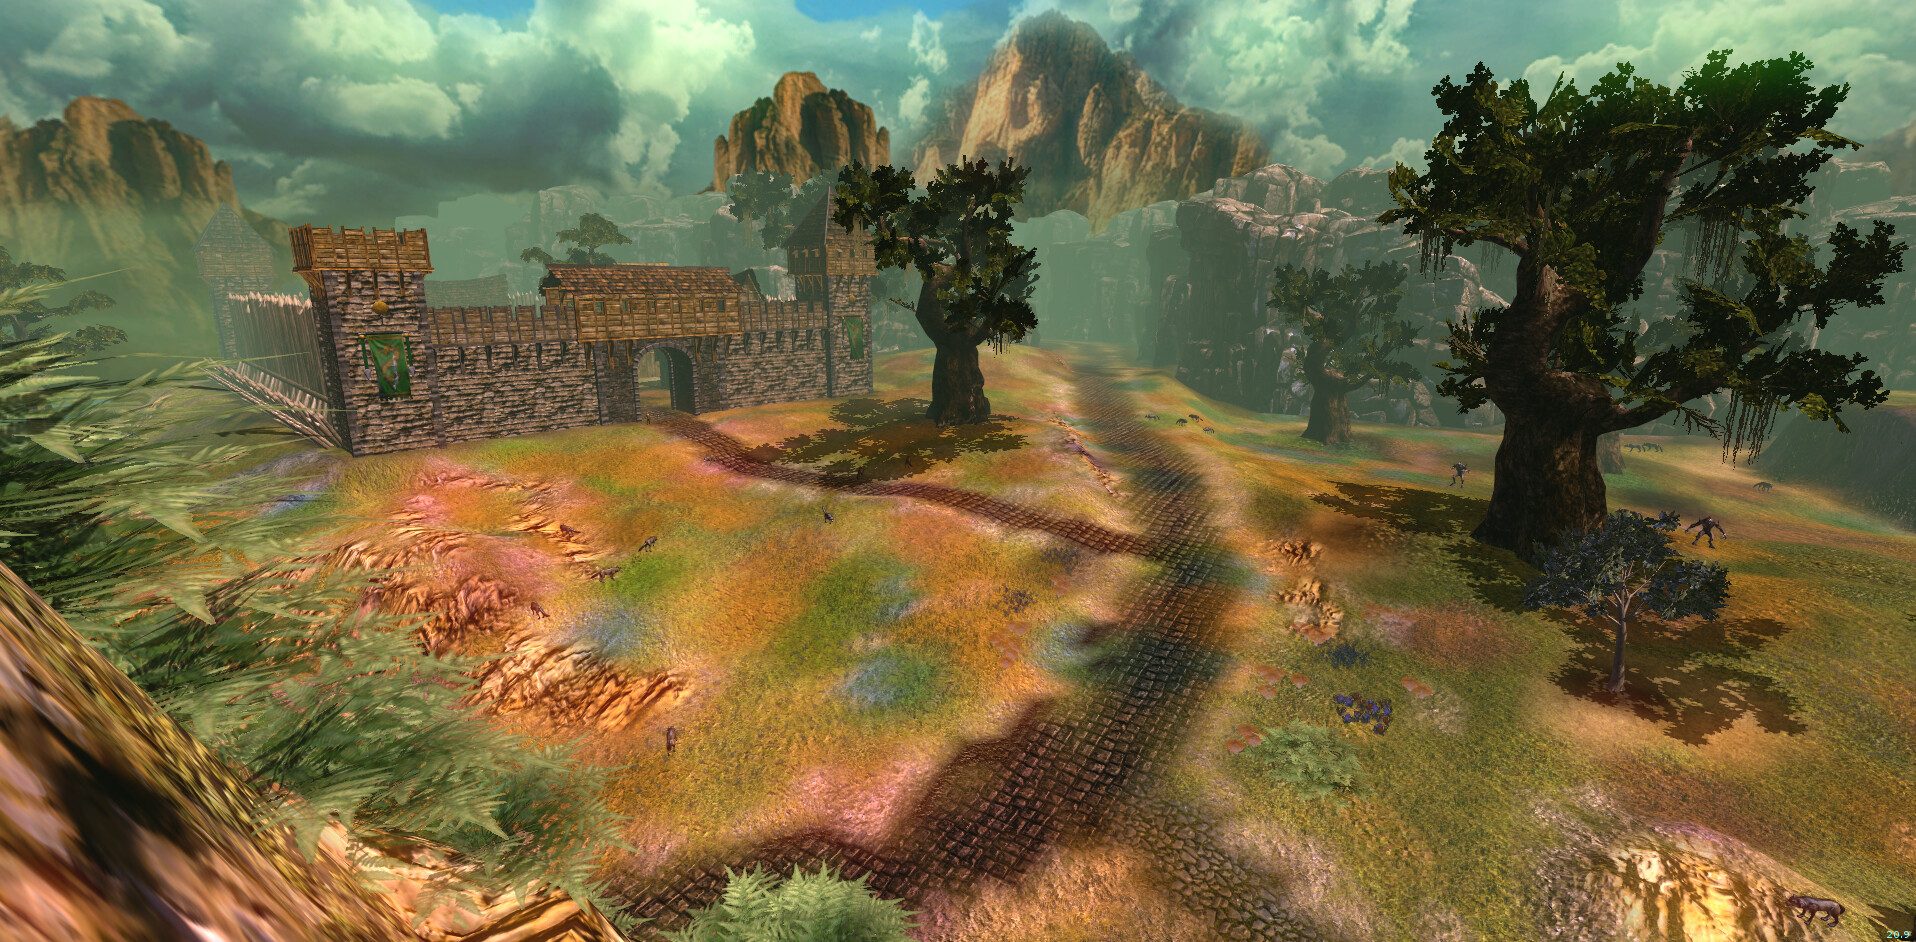 Magic to Master is a revived free-to-play MMORPG from 2009